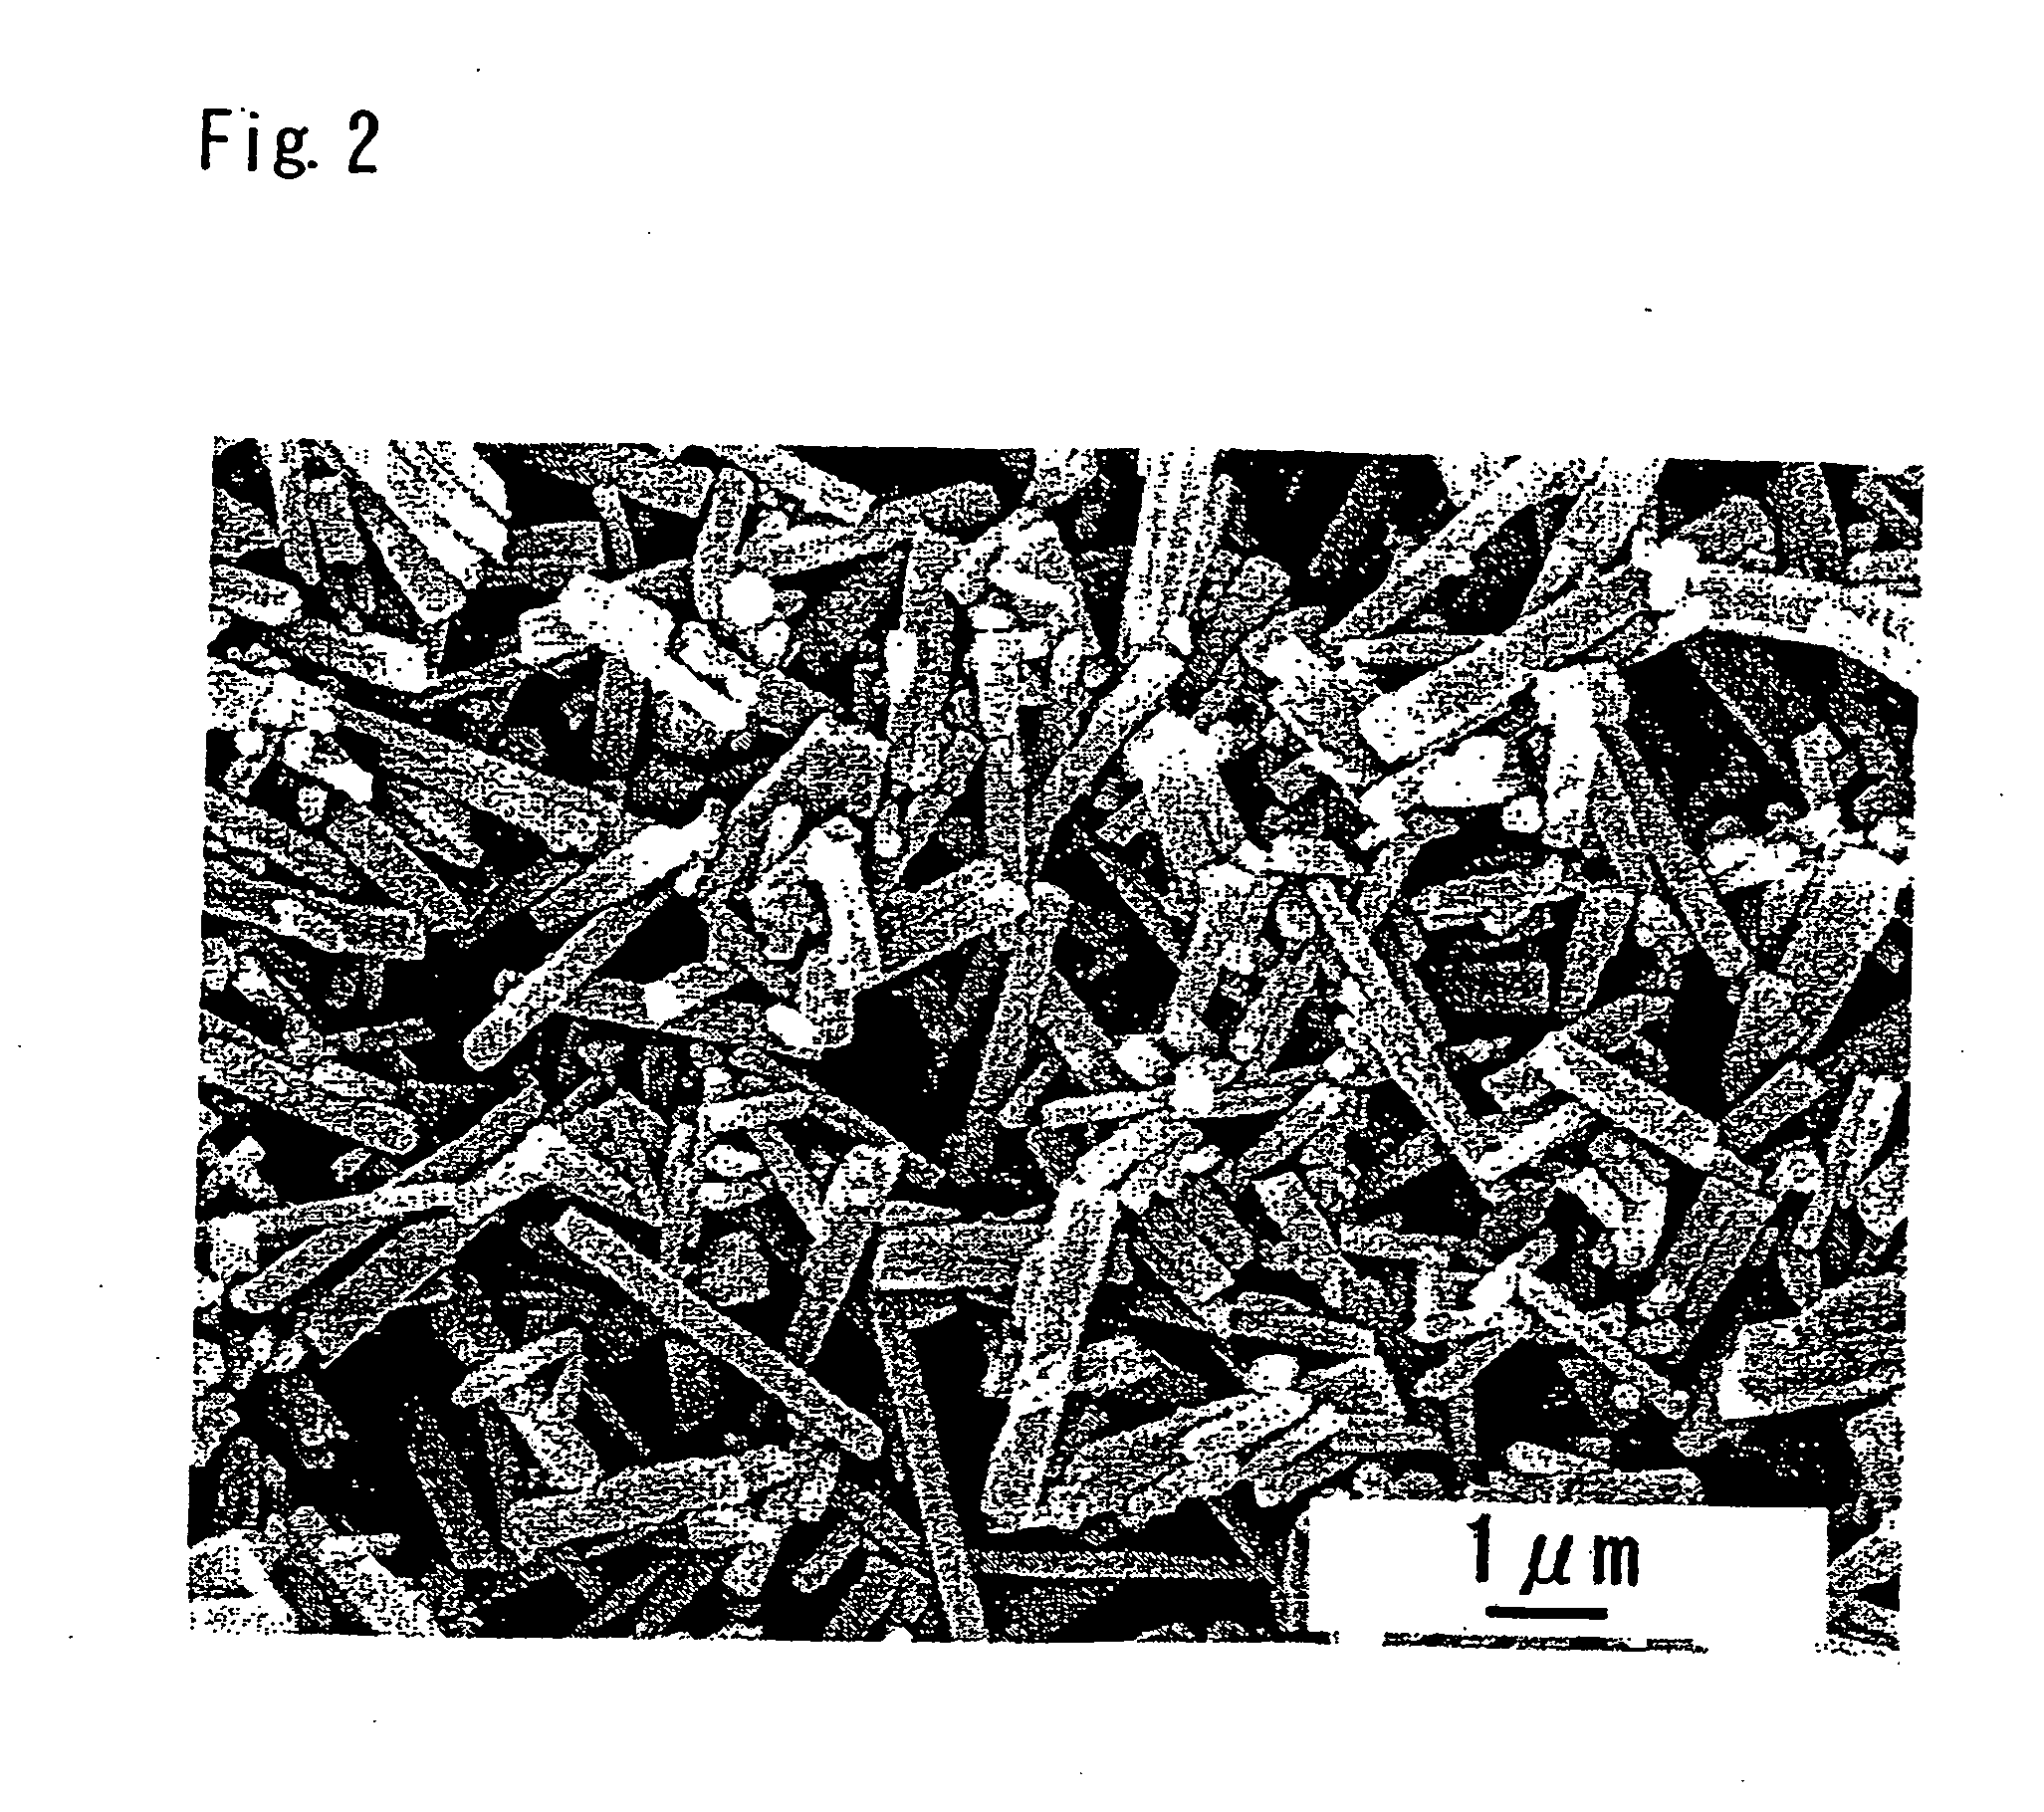 Fluorescent substance, method for manufacturing the same, illuminator and image display device